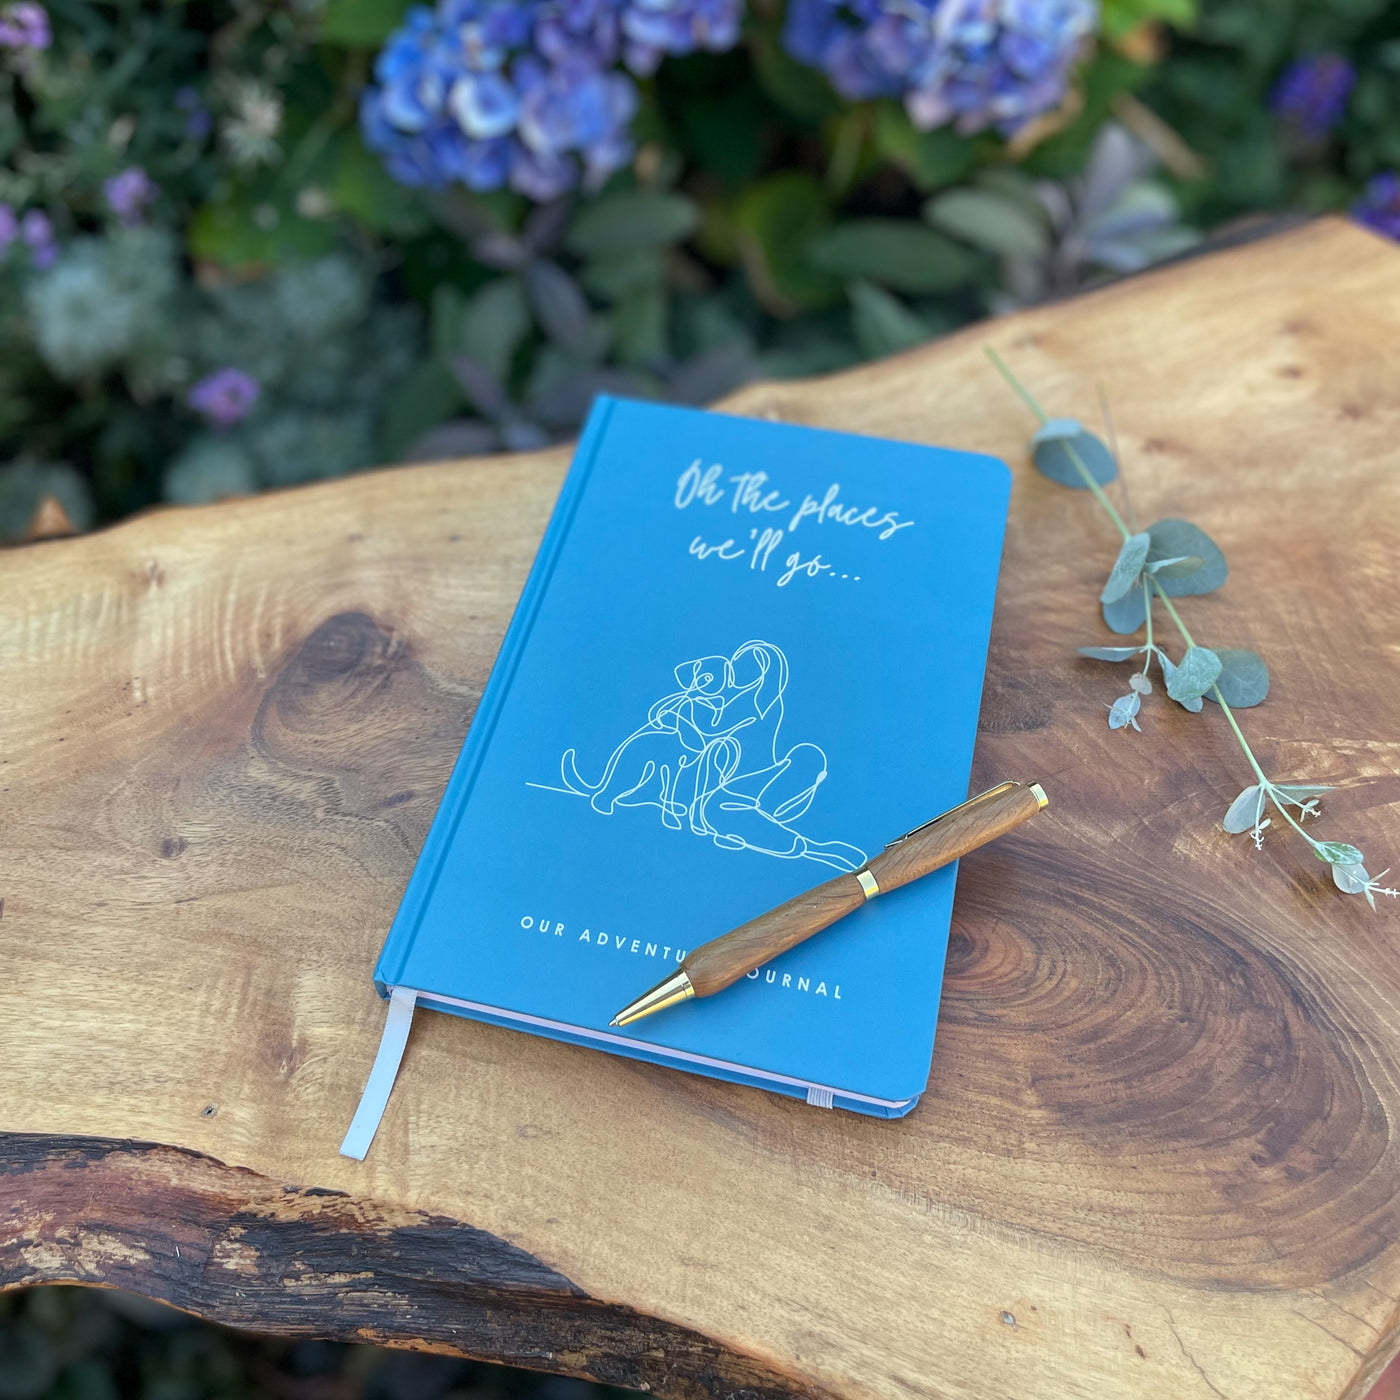 Oh the places we'll go... dog adventure journal in blue.